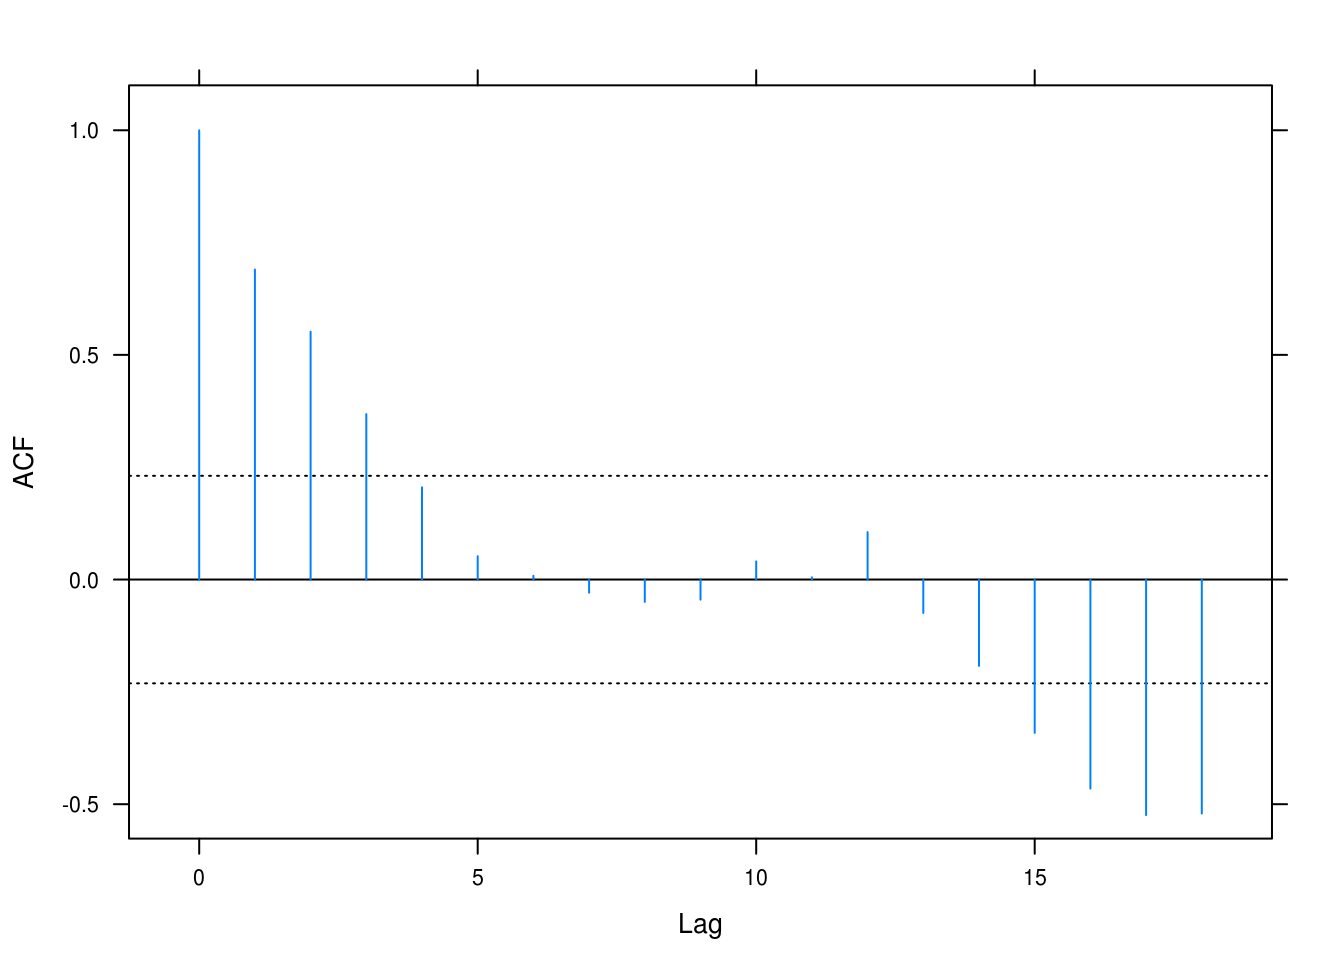 Autocorrelation for the quadratic fit on the wages time series.